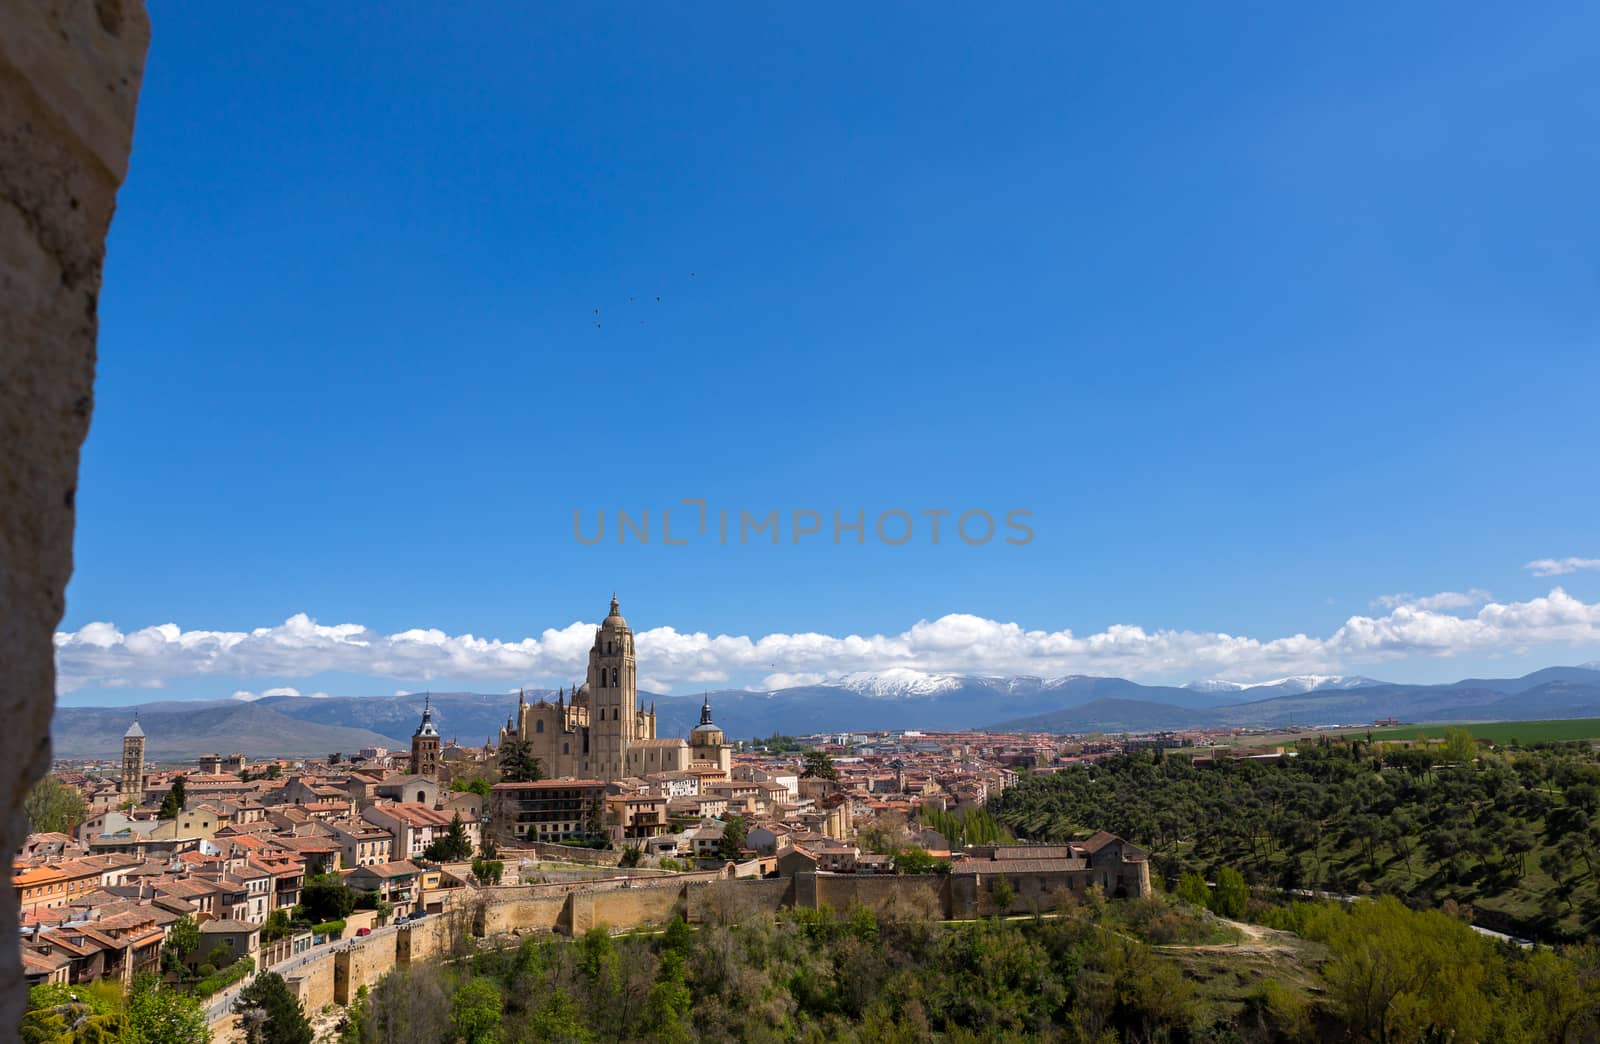 Cathedral of Segovia by zittto